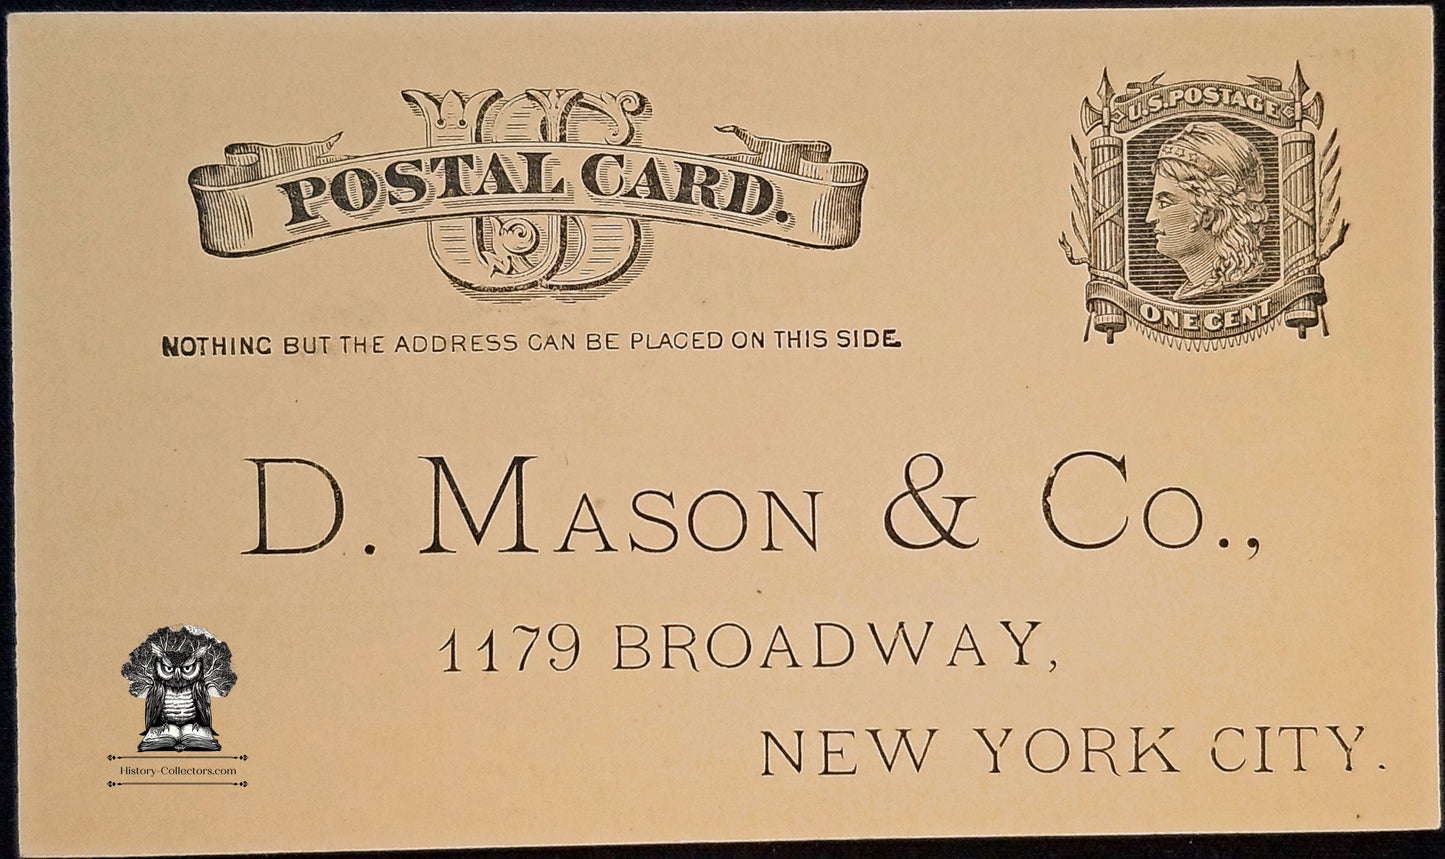 1883 D Mason & Co Advertising Perfection Lace Cabinets Order Form Postcard - 1179 Broadway New York City - One Cent Liberty Postal Card - Scott UX7